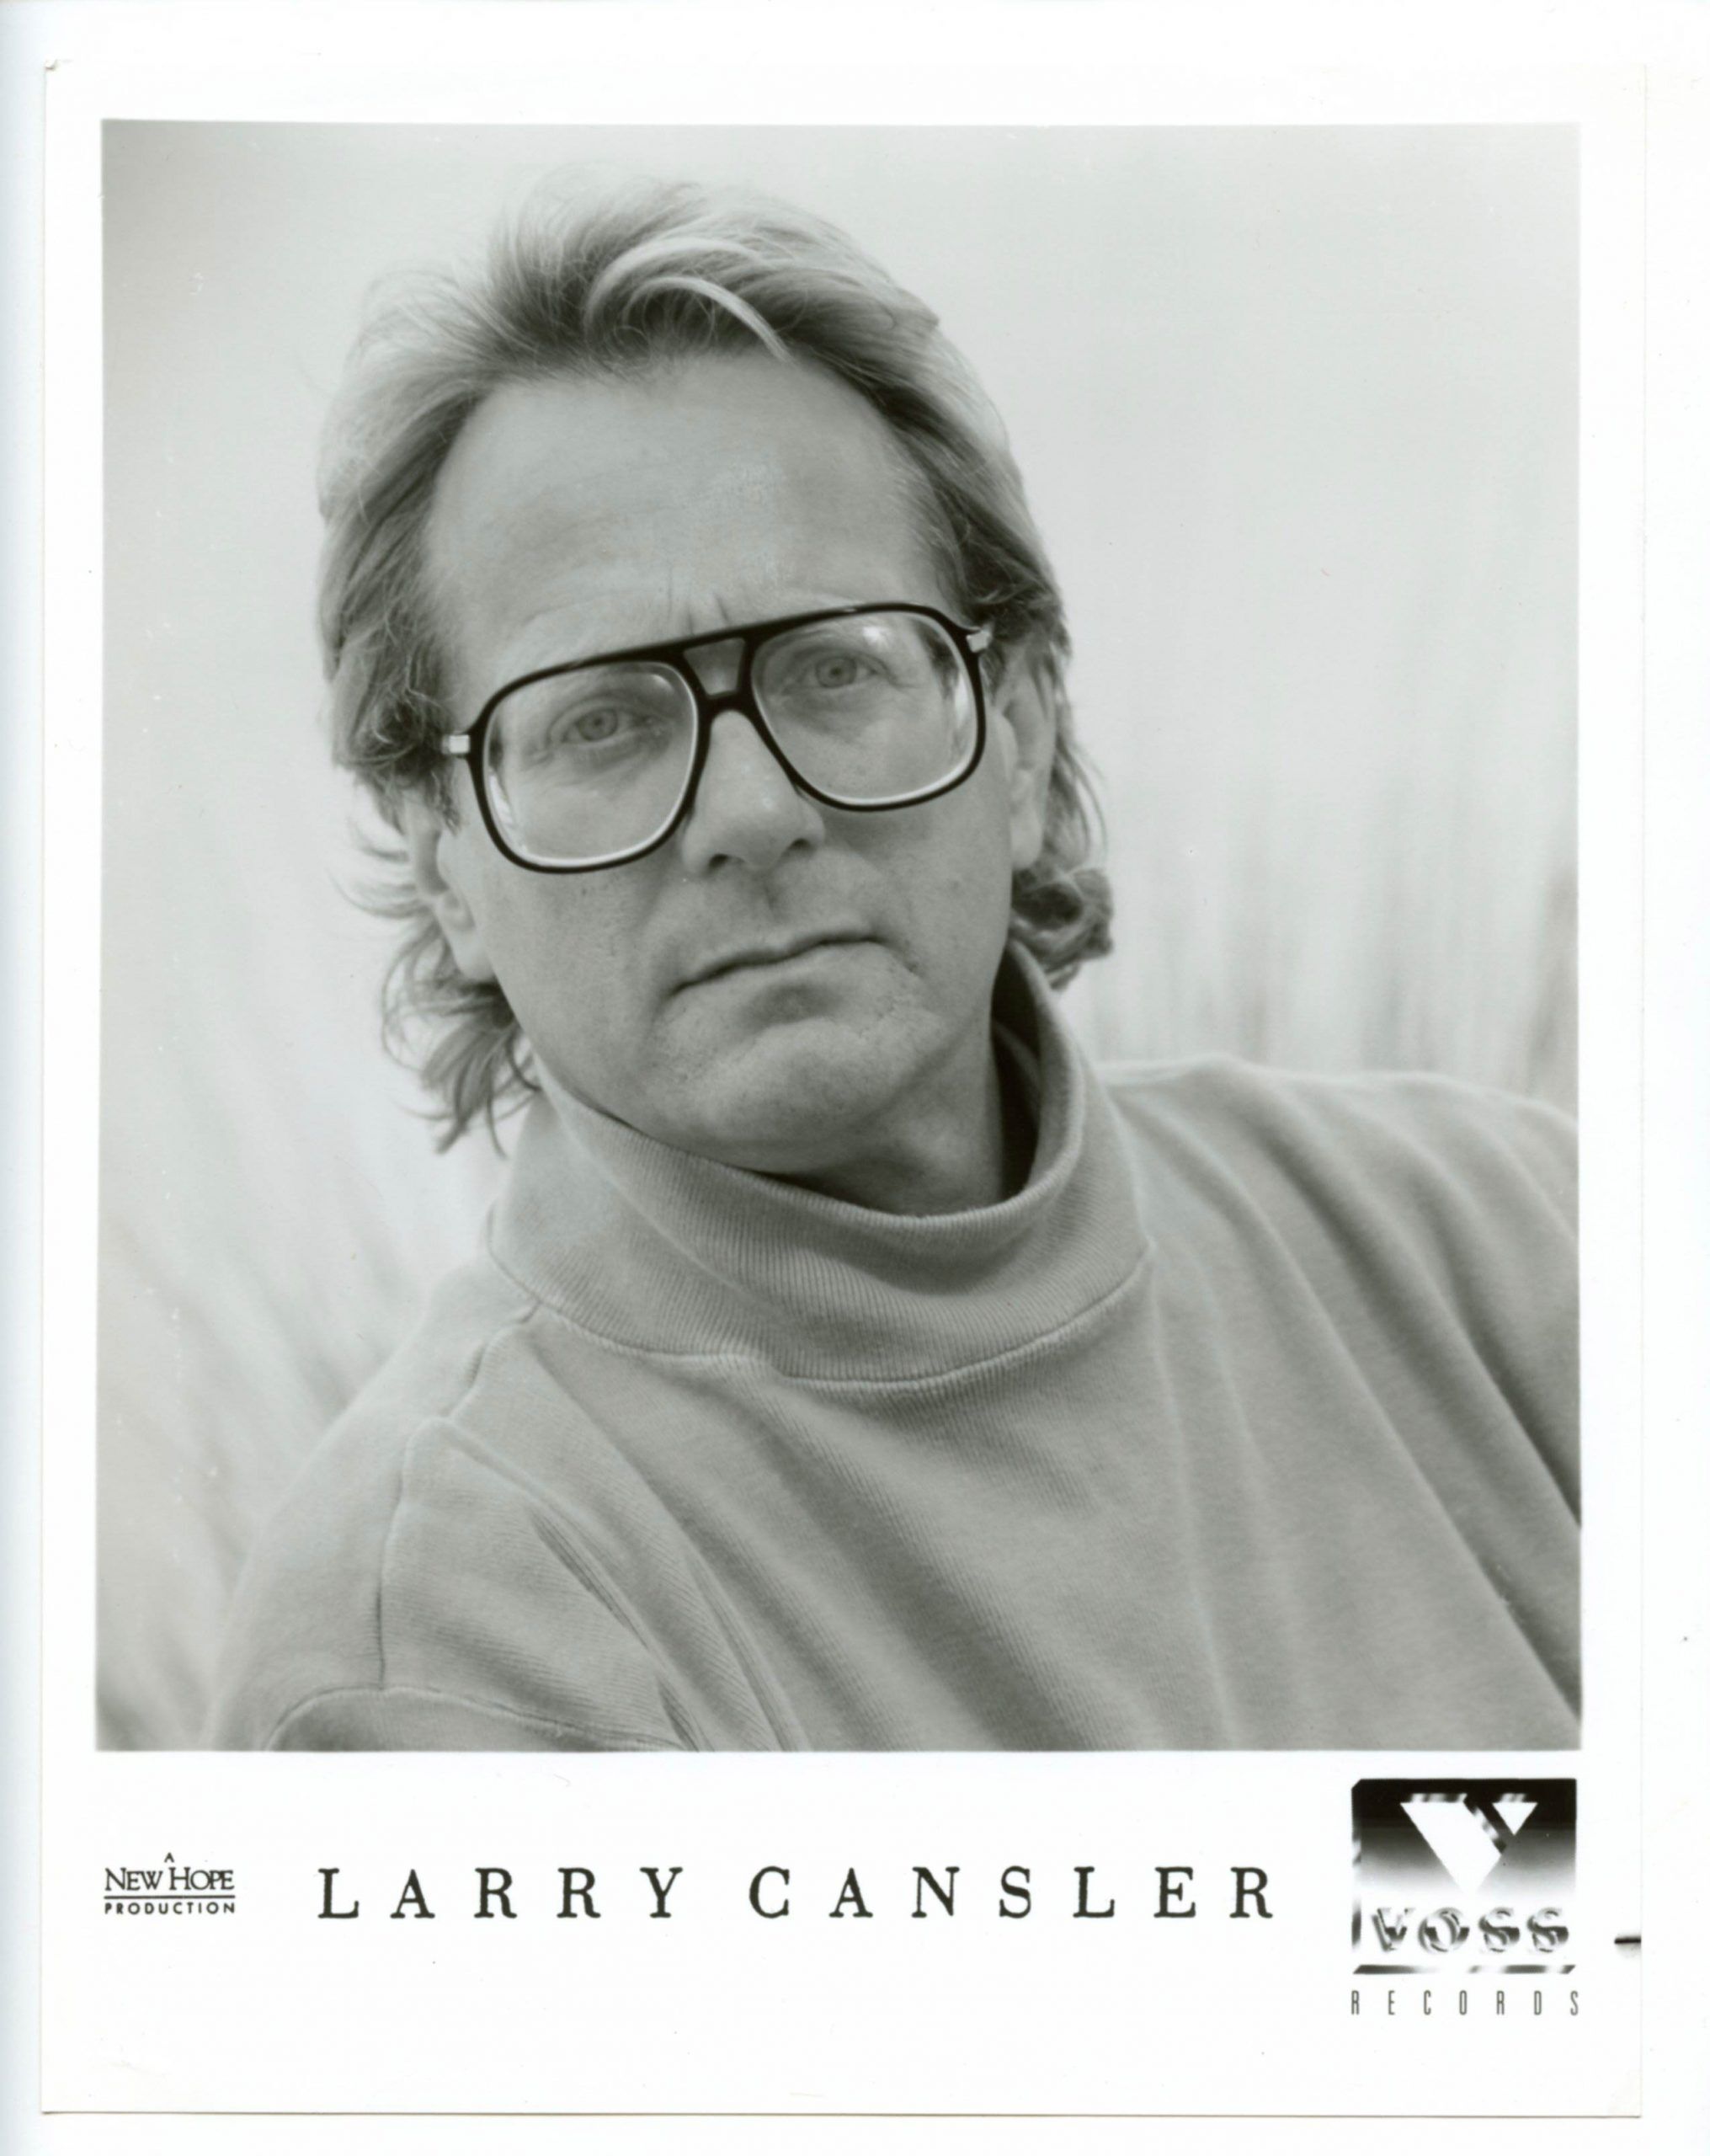 Larry Cansler Photo 1980s Voss Records